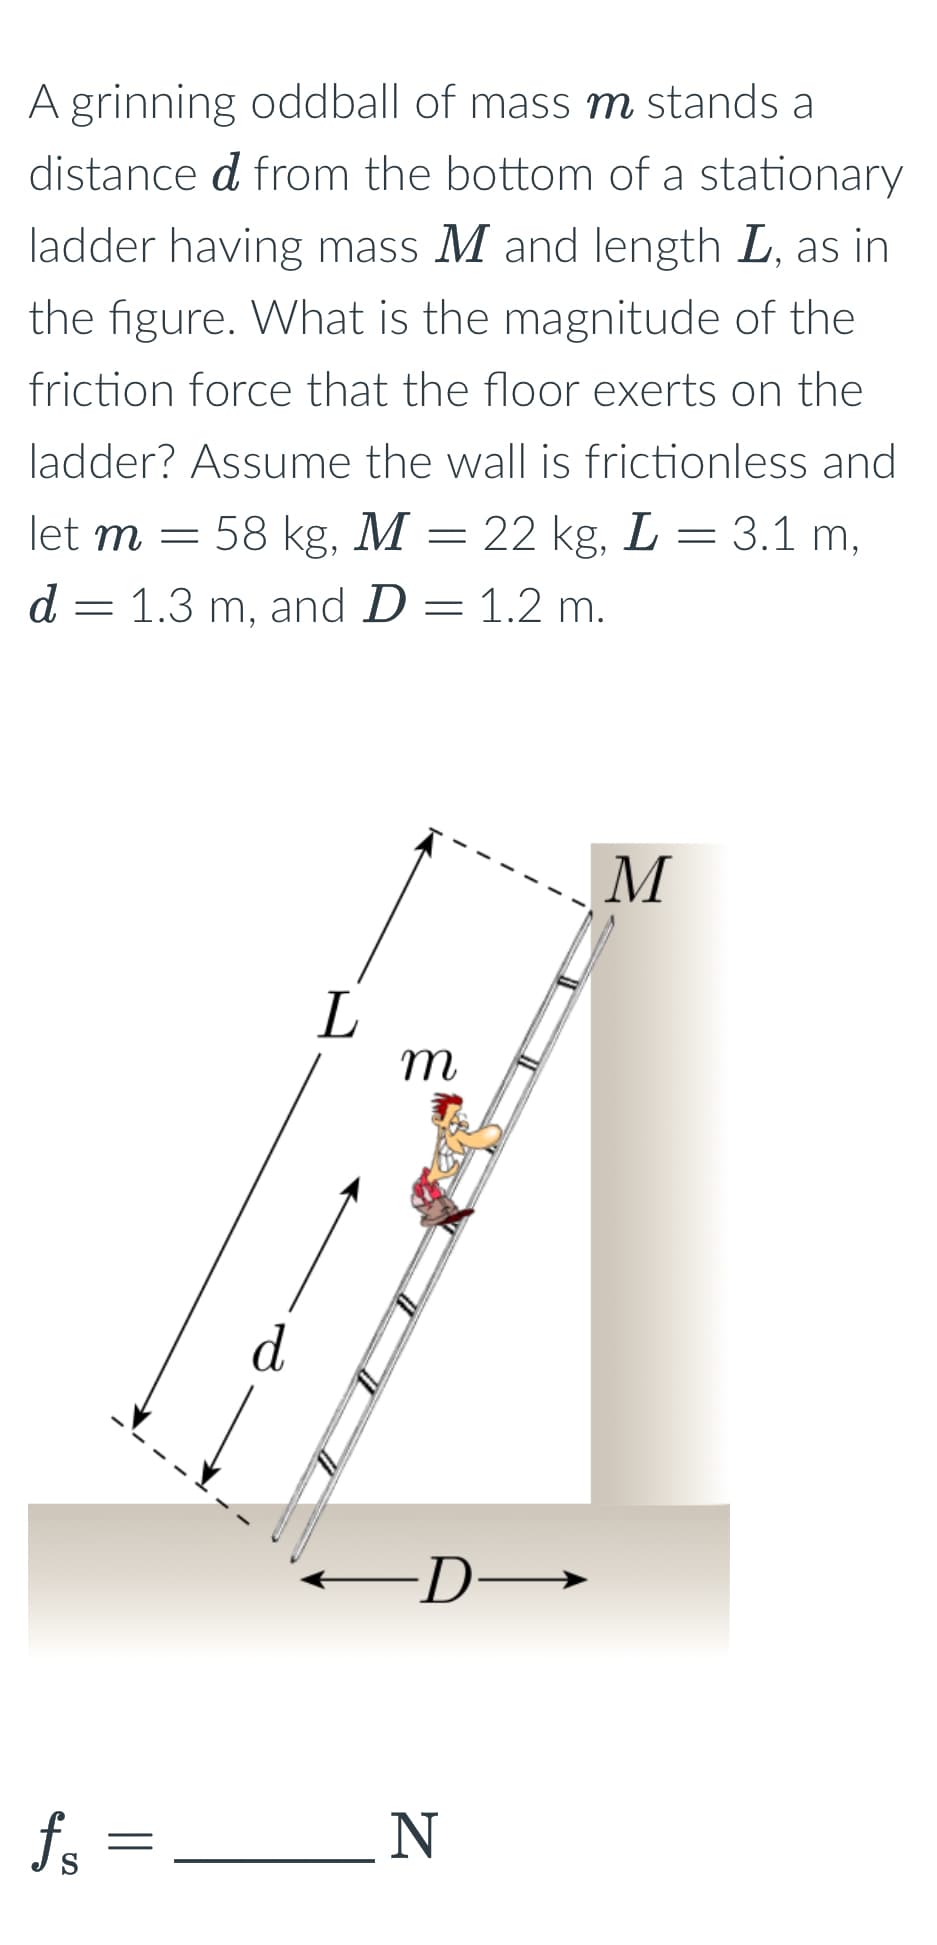 A grinning oddball of mass m stands a
distance d from the bottom of a stationary
ladder having mass M and length L, as in
the figure. What is the magnitude of the
friction force that the floor exerts on the
ladder? Assume the wall is frictionless and
58 kg, M = 22 kg, L = 3.1 m,
let m
d = 1.3 m, and D = 1.2 m.
d
L
m
M
·D→
fs
=
N